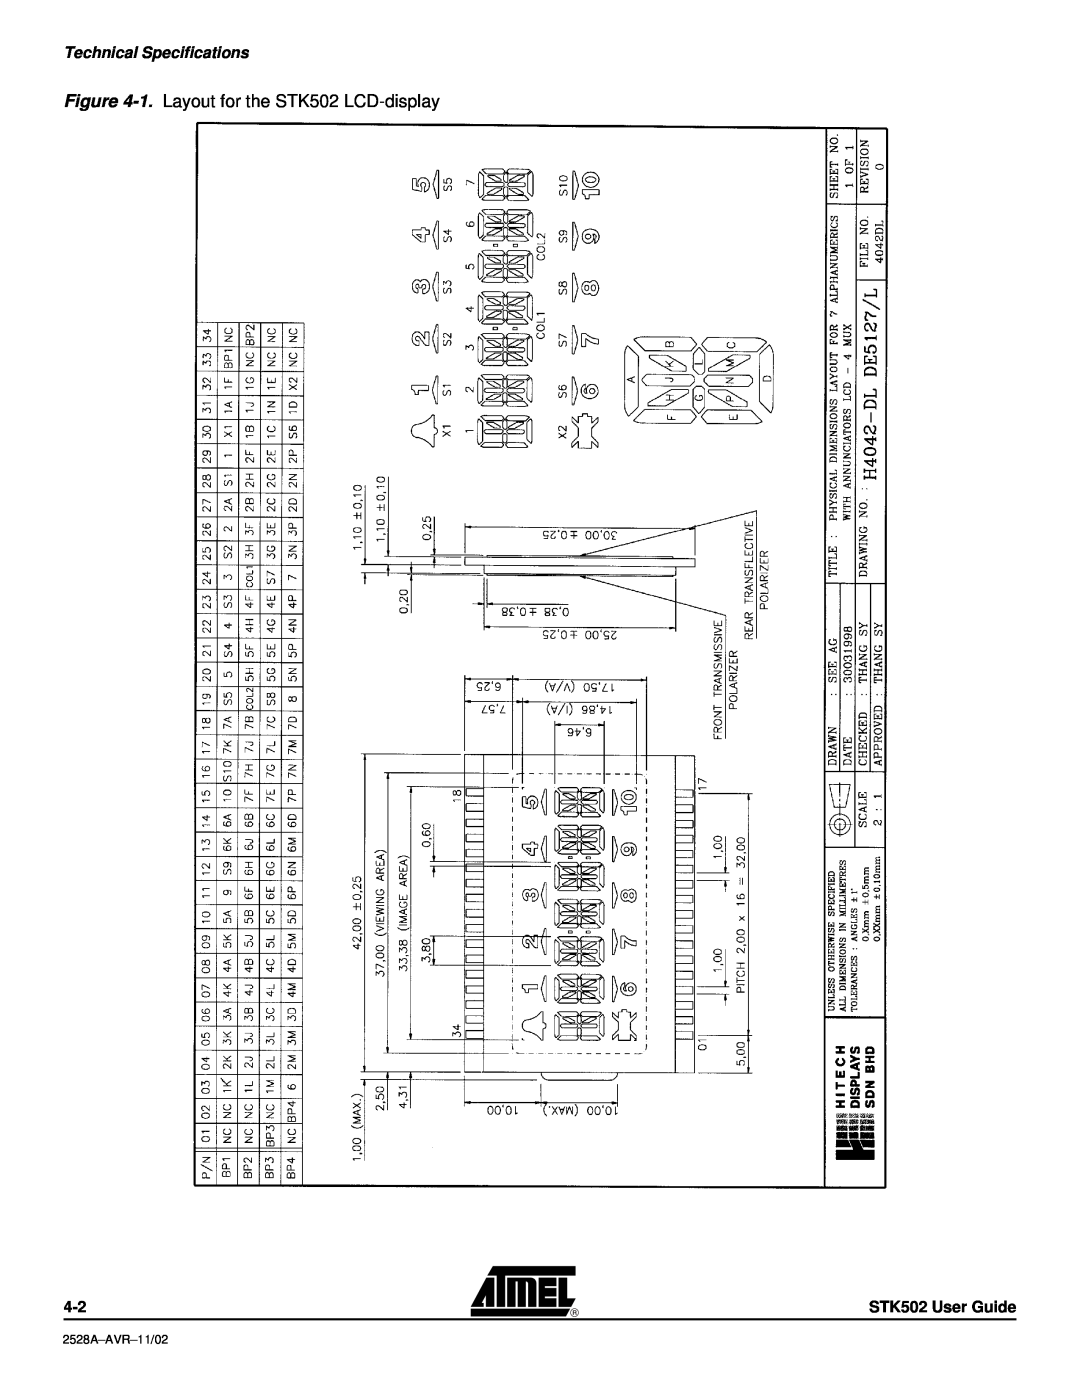 Atmel manual 1. Layout for the STK502 LCD-display, Technical Specifications, 2528A-AVR-11/02 